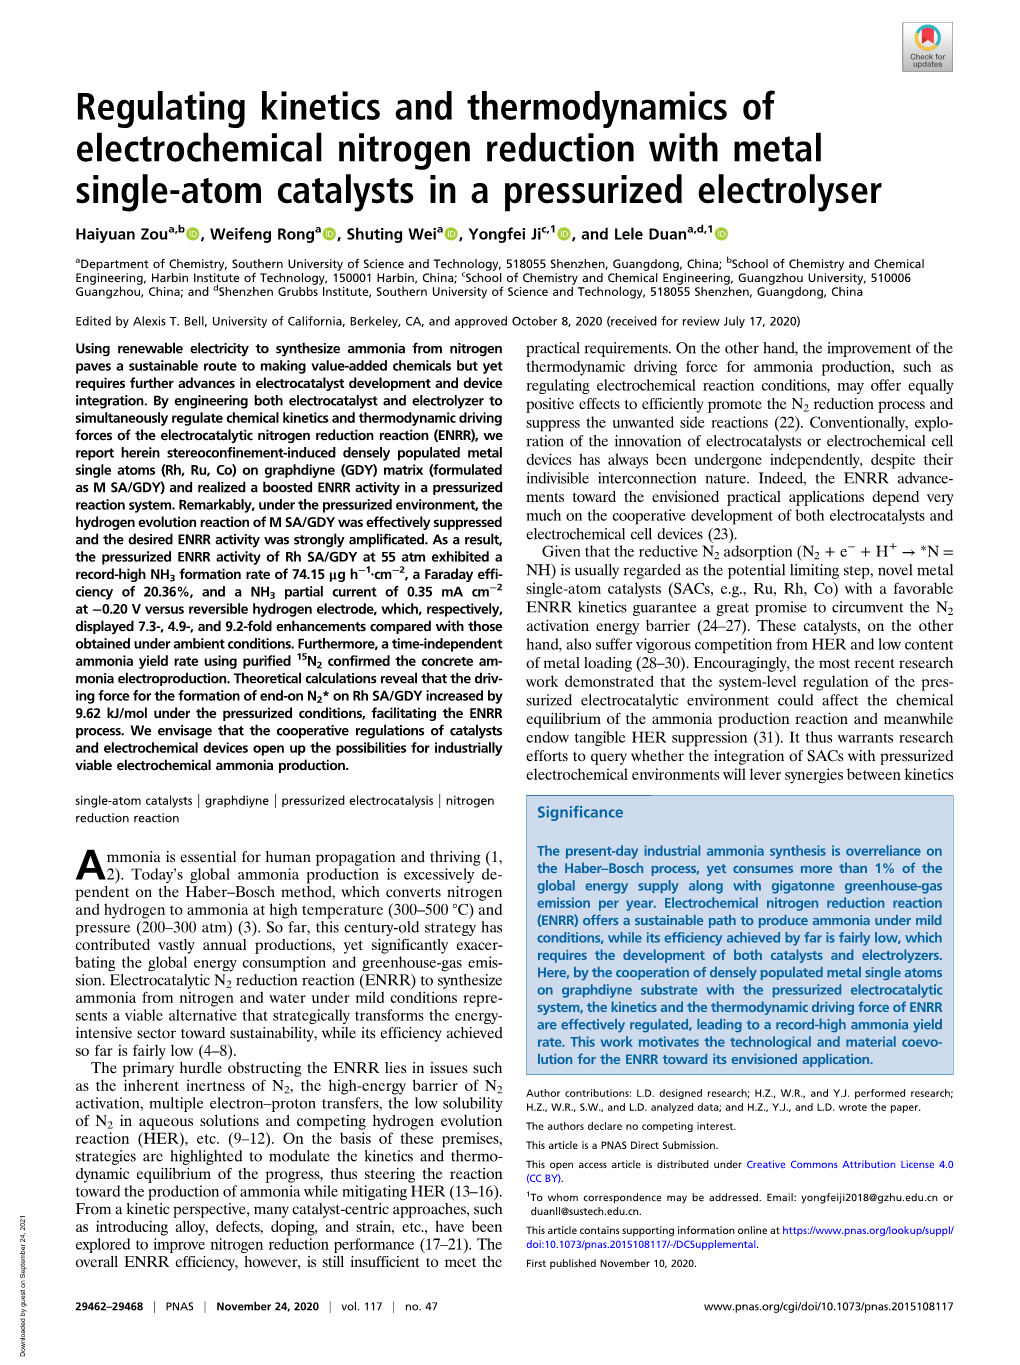 Regulating Kinetics and Thermodynamics of Electrochemical Nitrogen Reduction with Metal Single-Atom Catalysts in a Pressurized Electrolyser